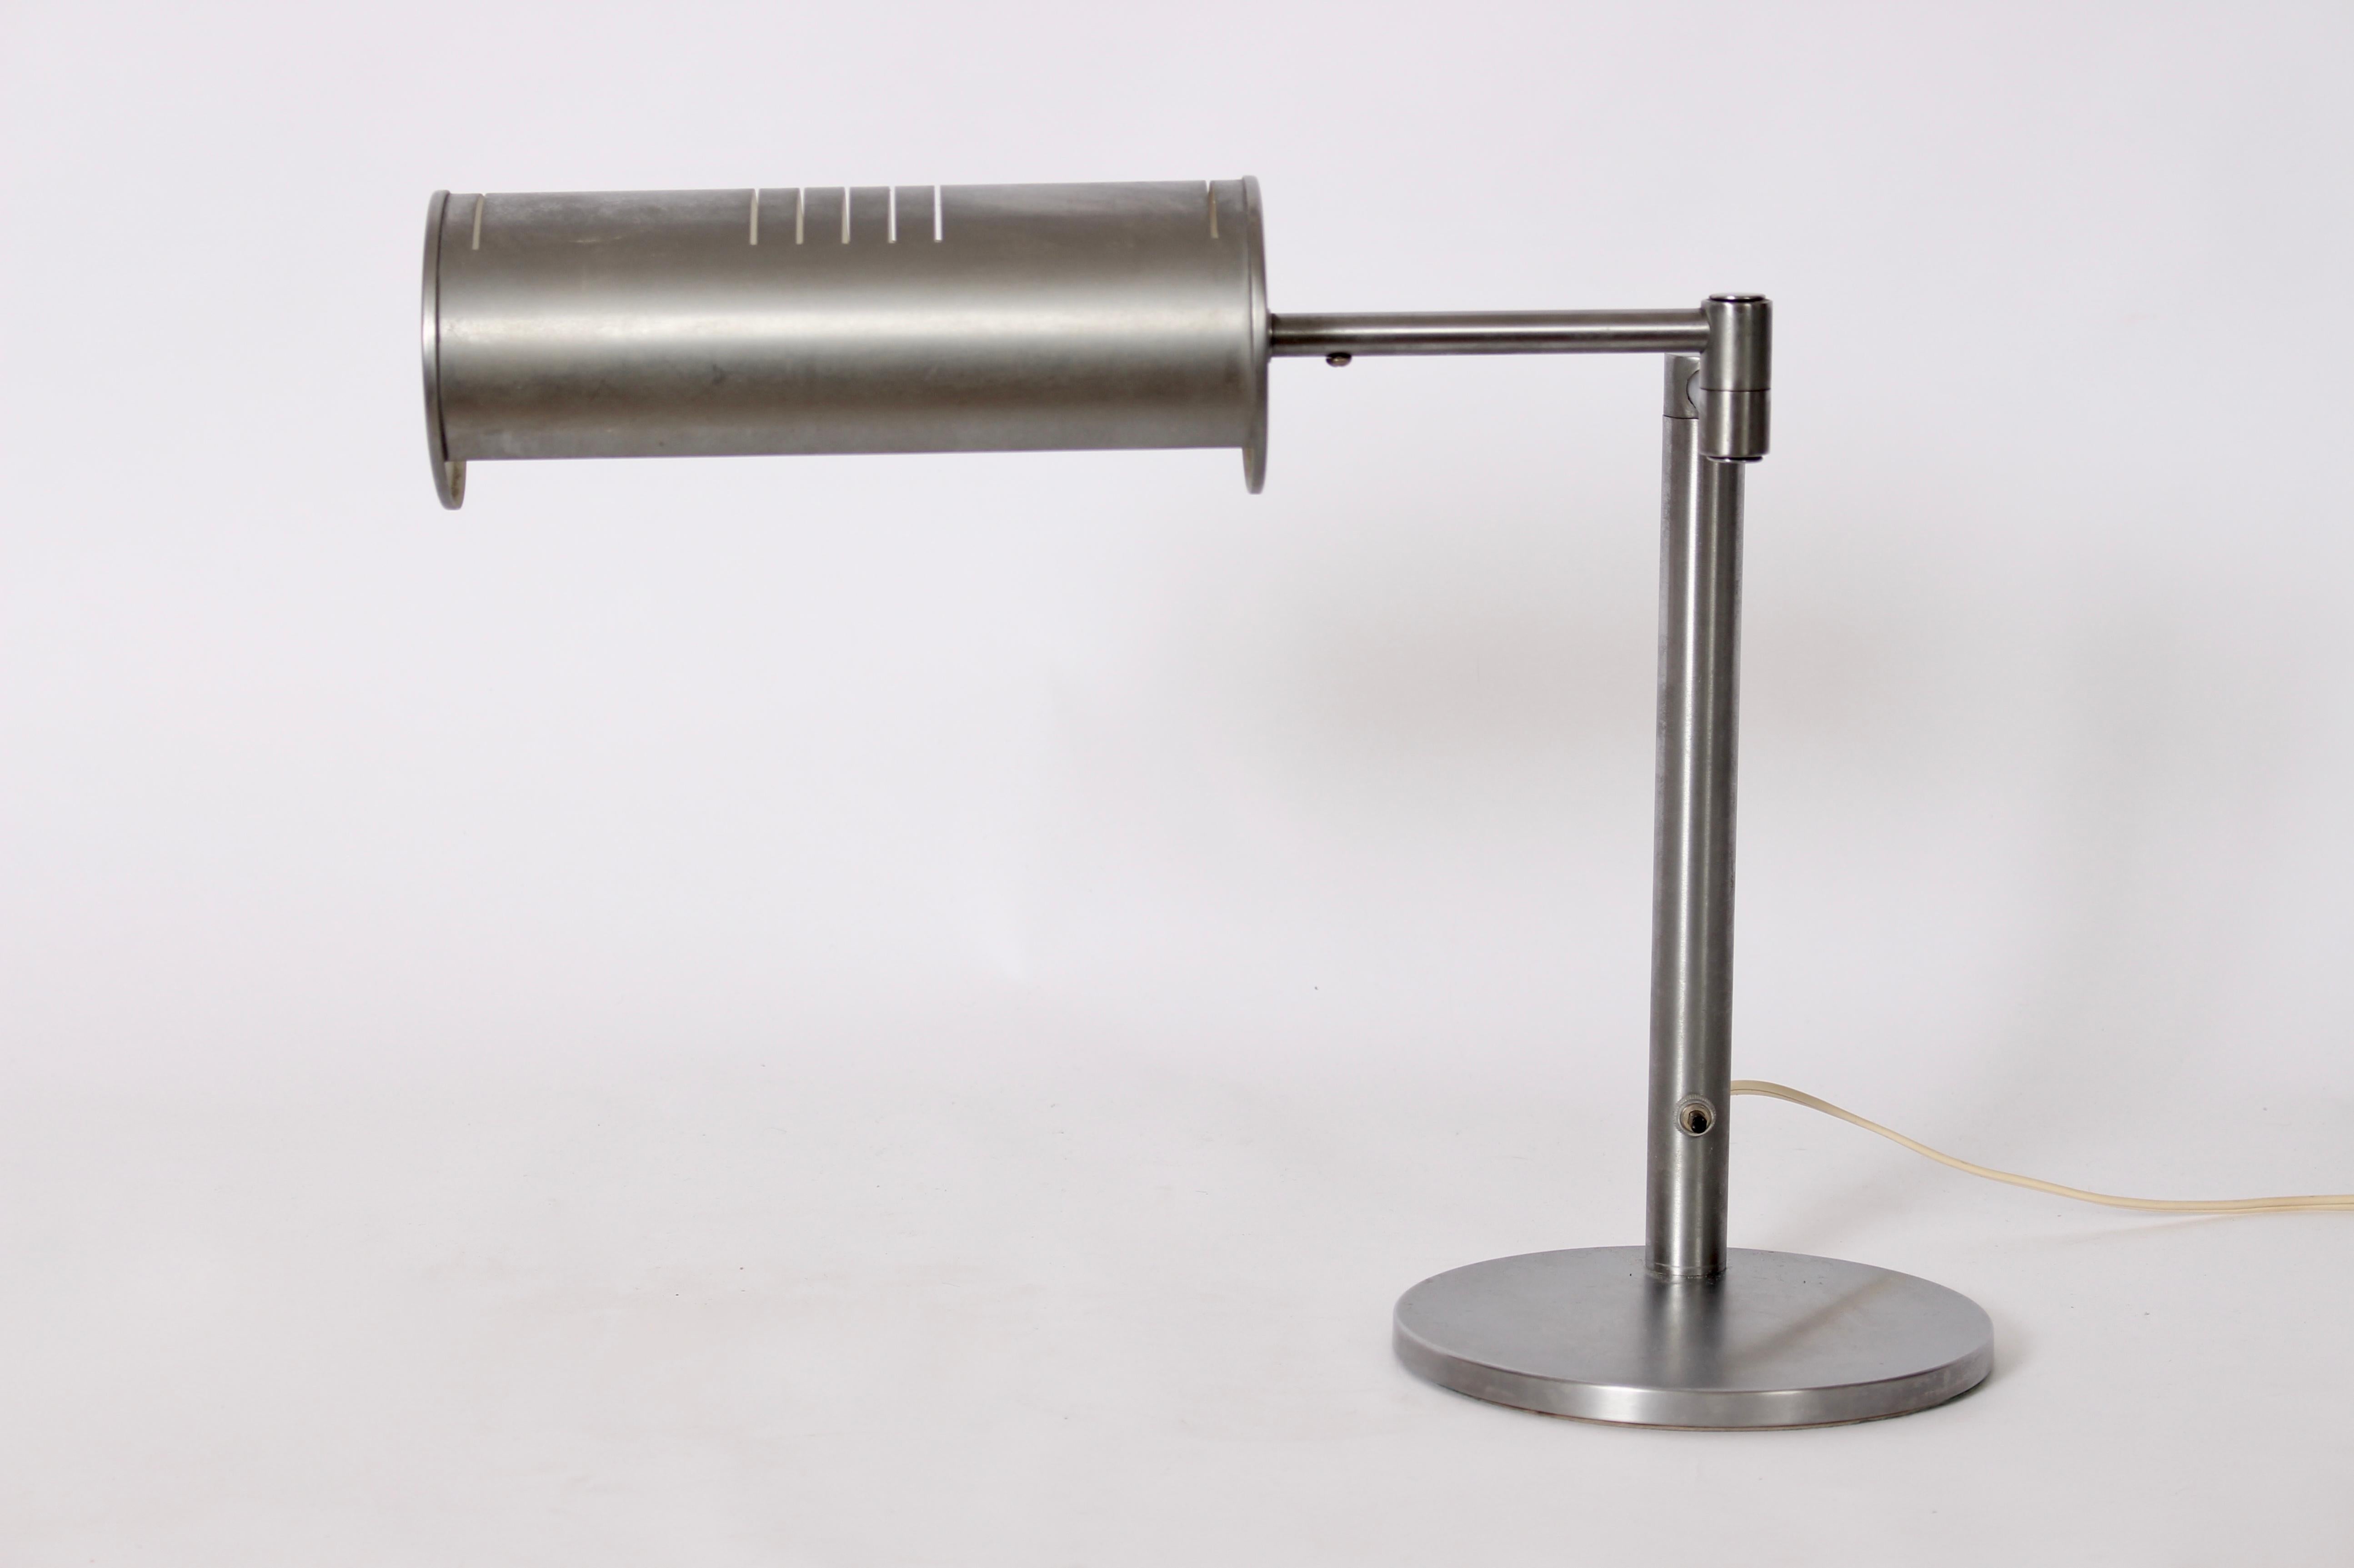 Nessen Studios Brushed Steel Swing Arm Desk Lamp with extending and adjustable Cylinder Shade. This Classic Nessen design rarely seen in all Brushed Steel features a perforated swing shade (extending to 15L) and sturdy round 8D base, wIth column